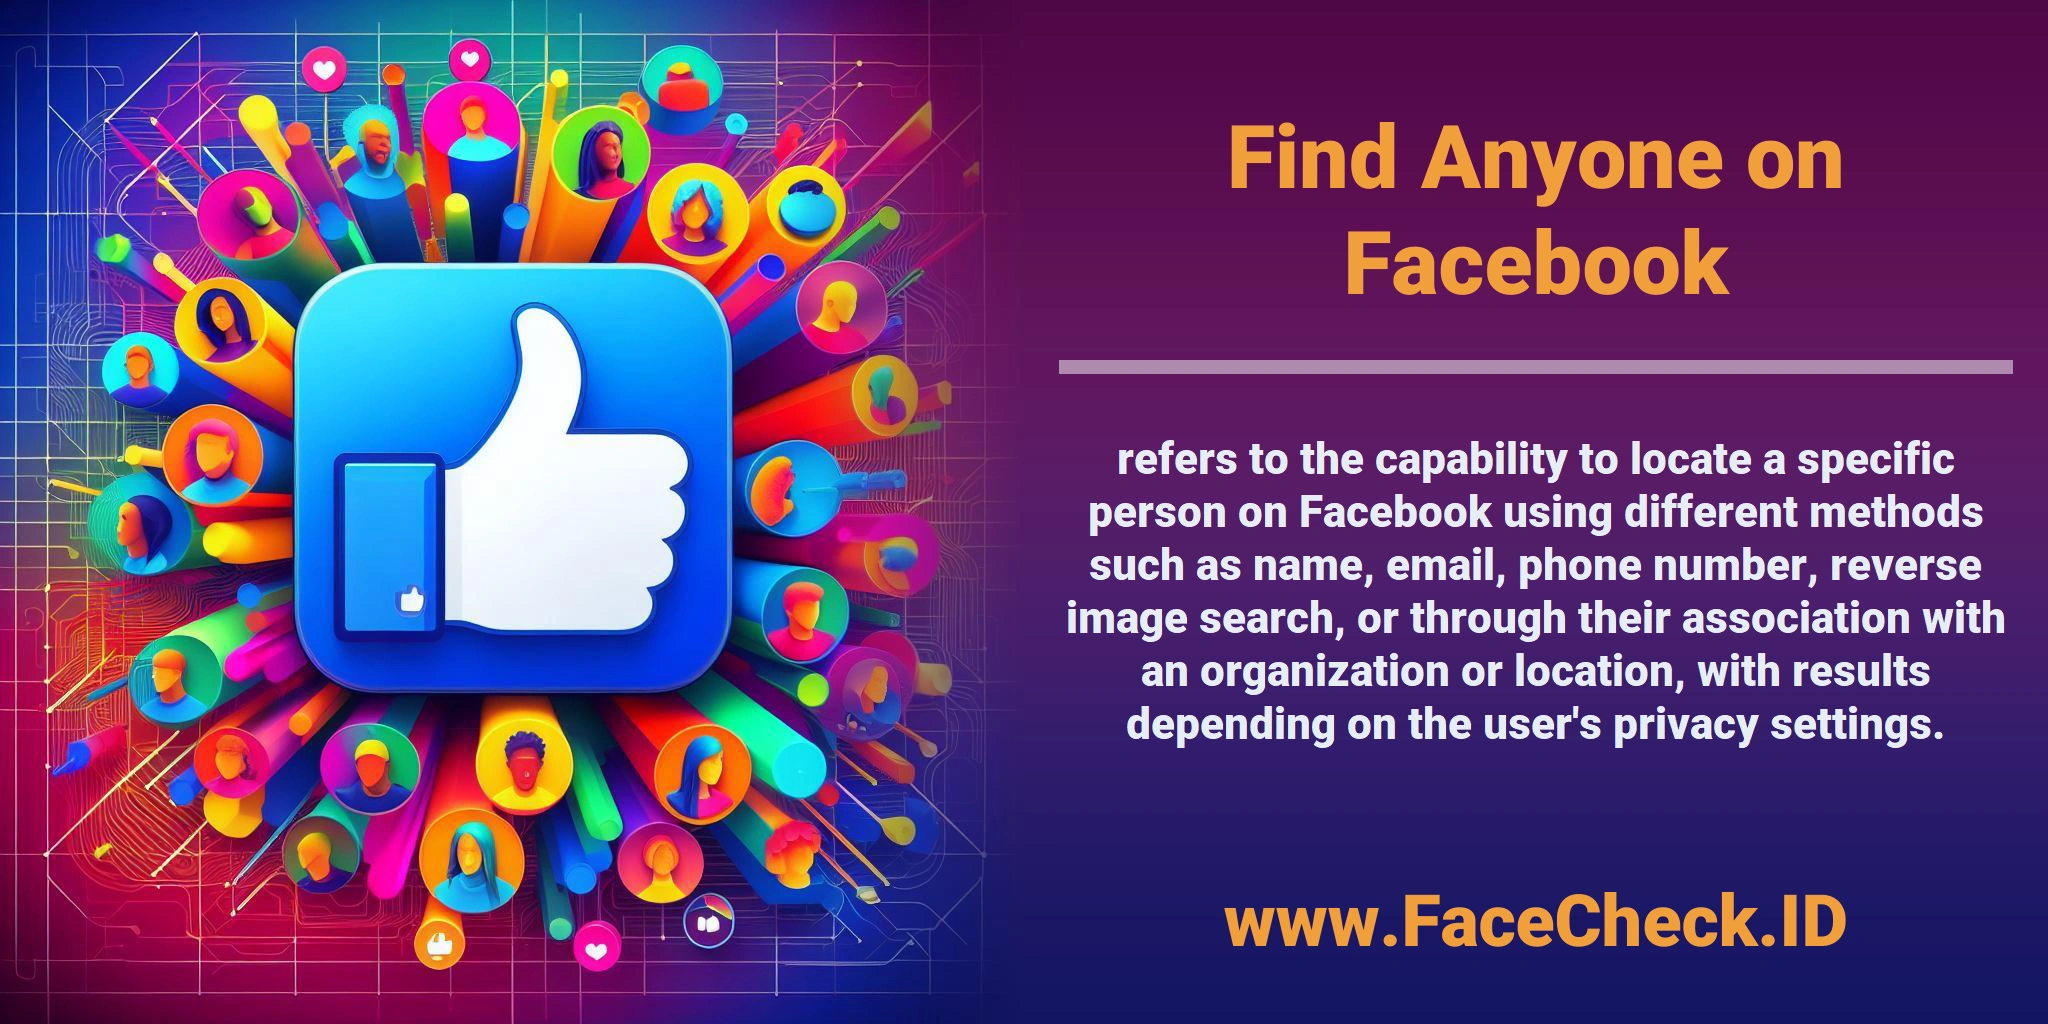 <b>Find Anyone on Facebook</b> refers to the capability to locate a specific person on Facebook using different methods such as name, email, phone number, reverse image search, or through their association with an organization or location, with results depending on the user's privacy settings.